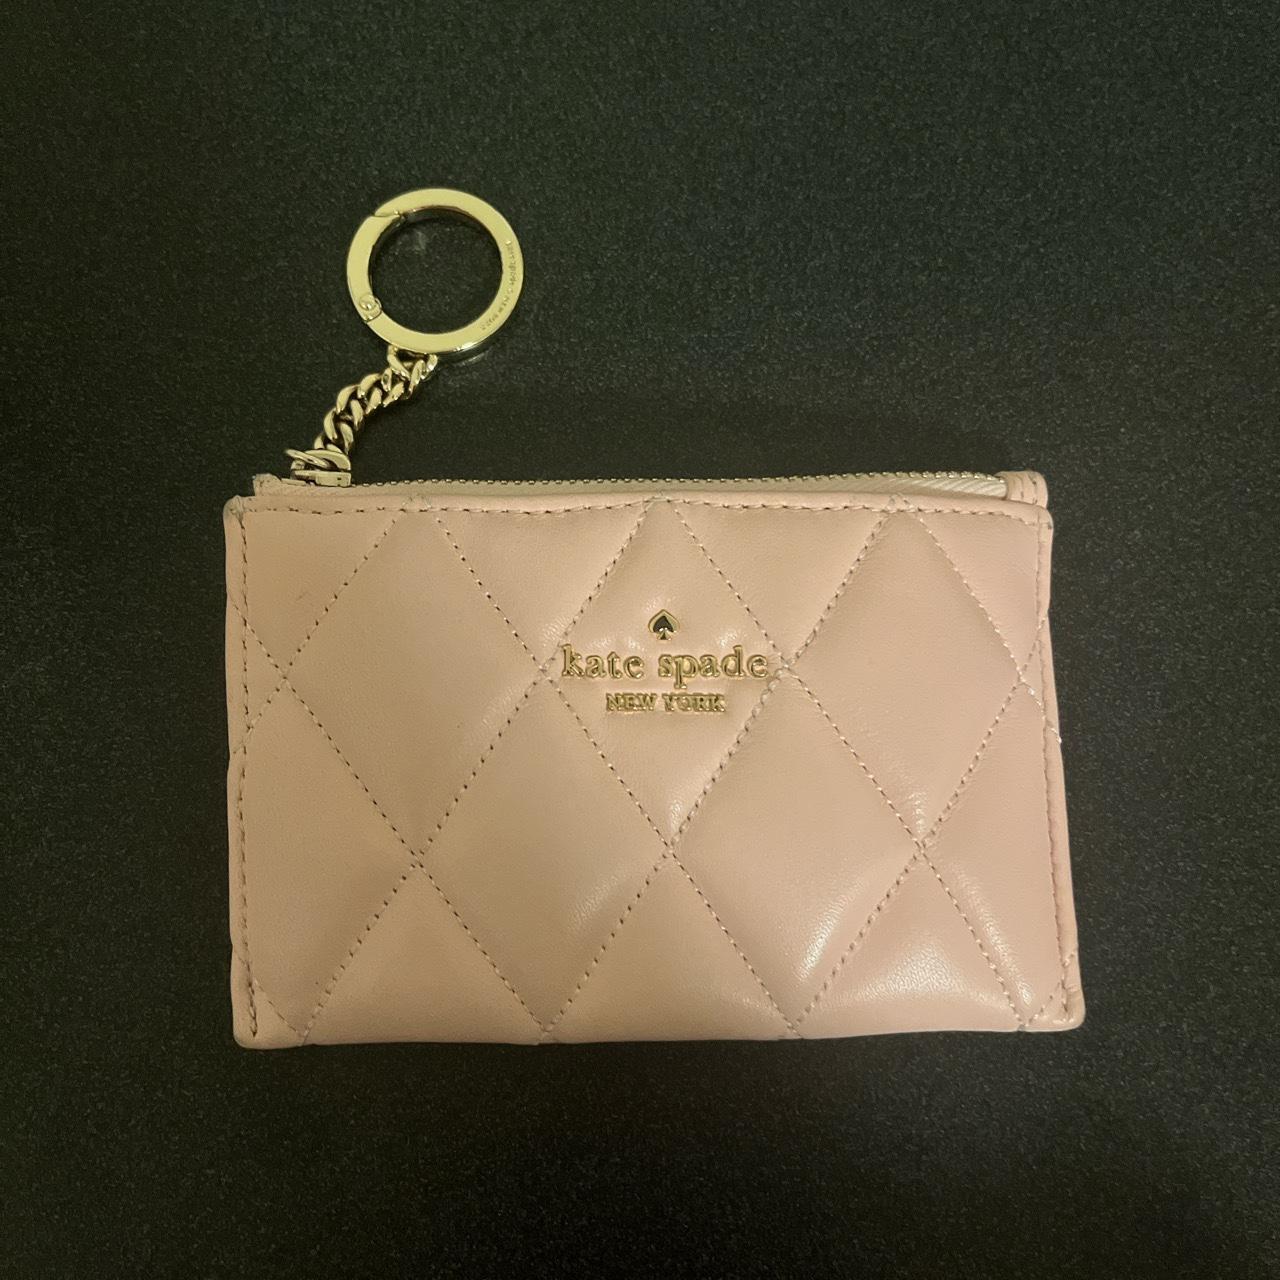 kate spade, Bags, Kate Spade Hot Pink Quilted Purse